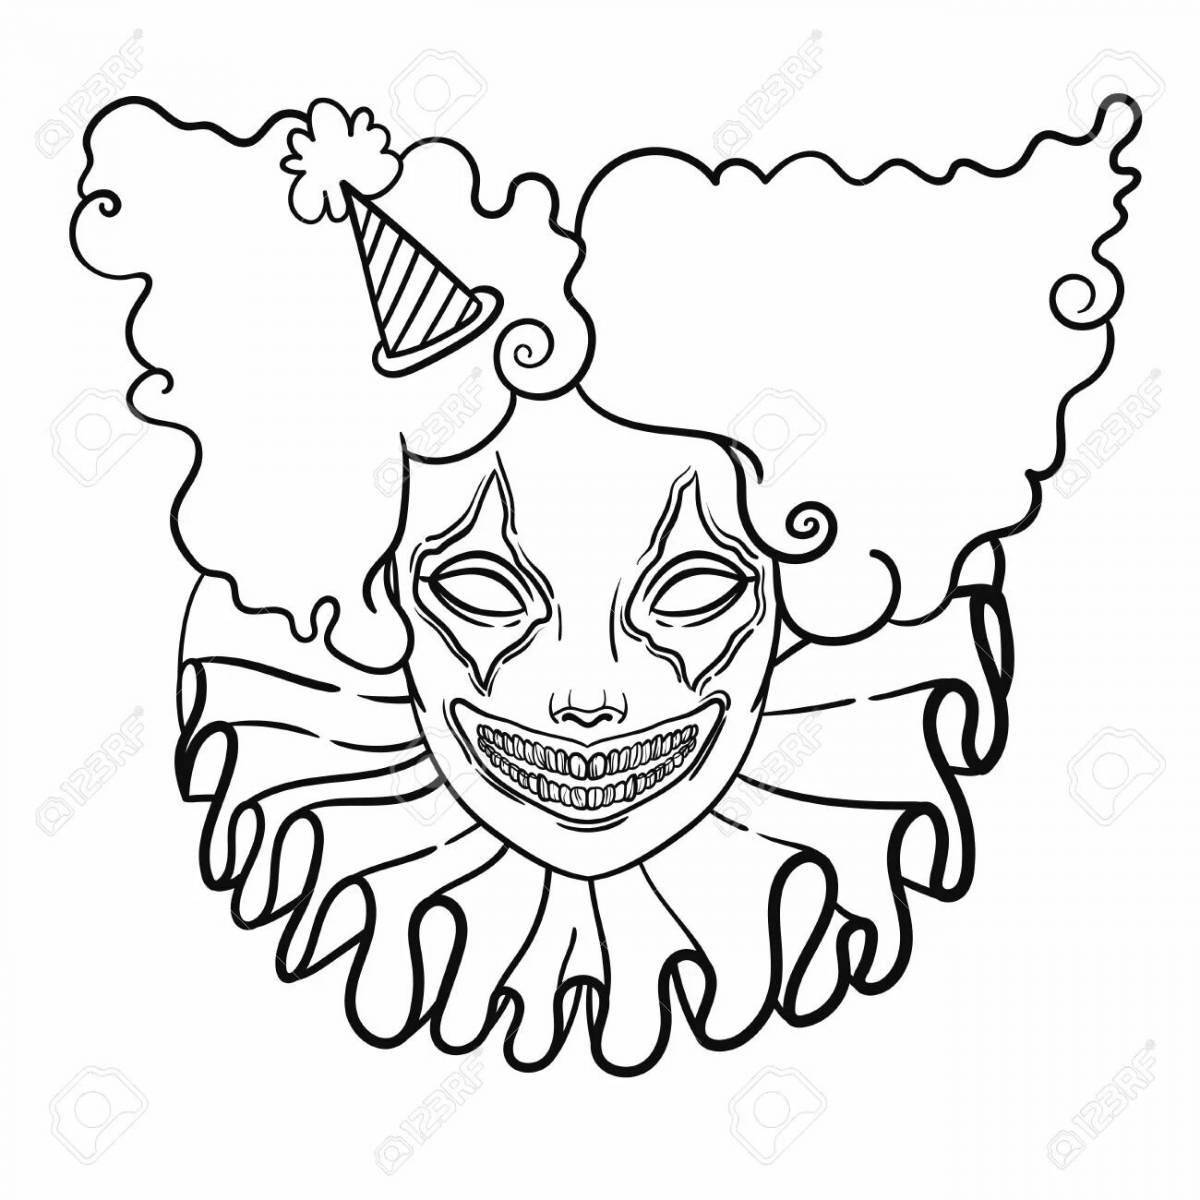 Shocking scary clown coloring book